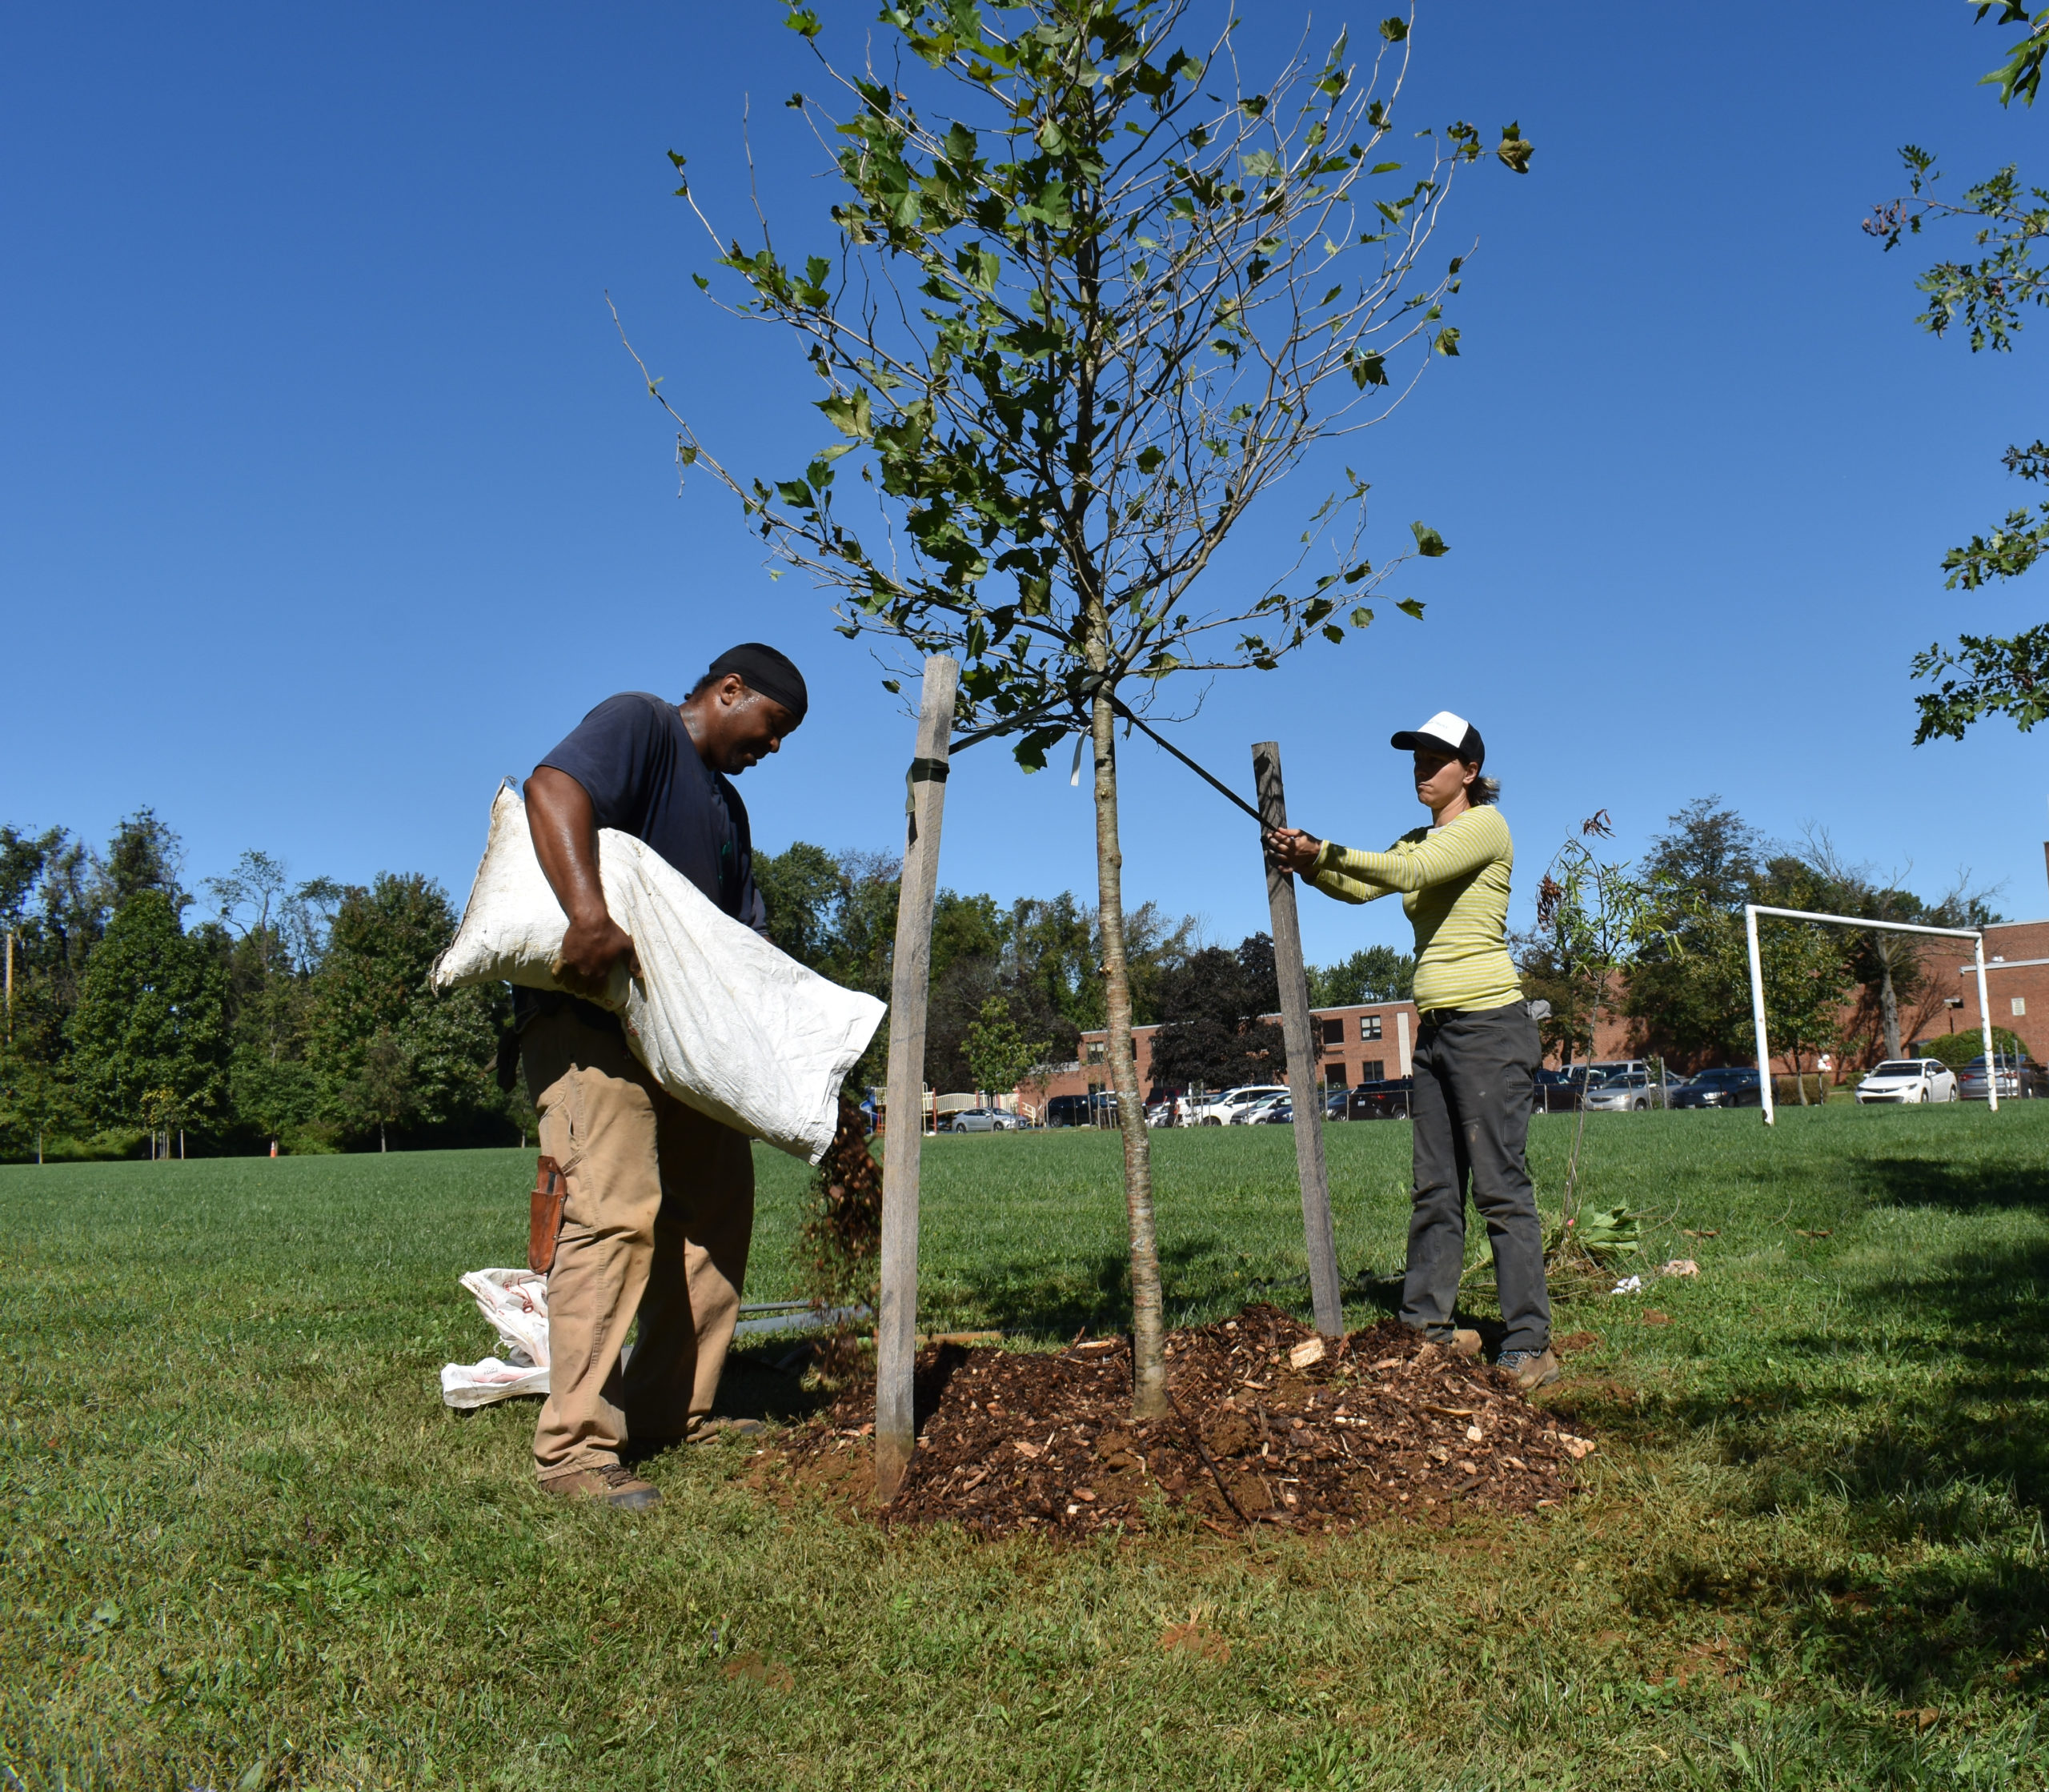 A man spreads mulch around a newly planted tree while a woman secures supports.